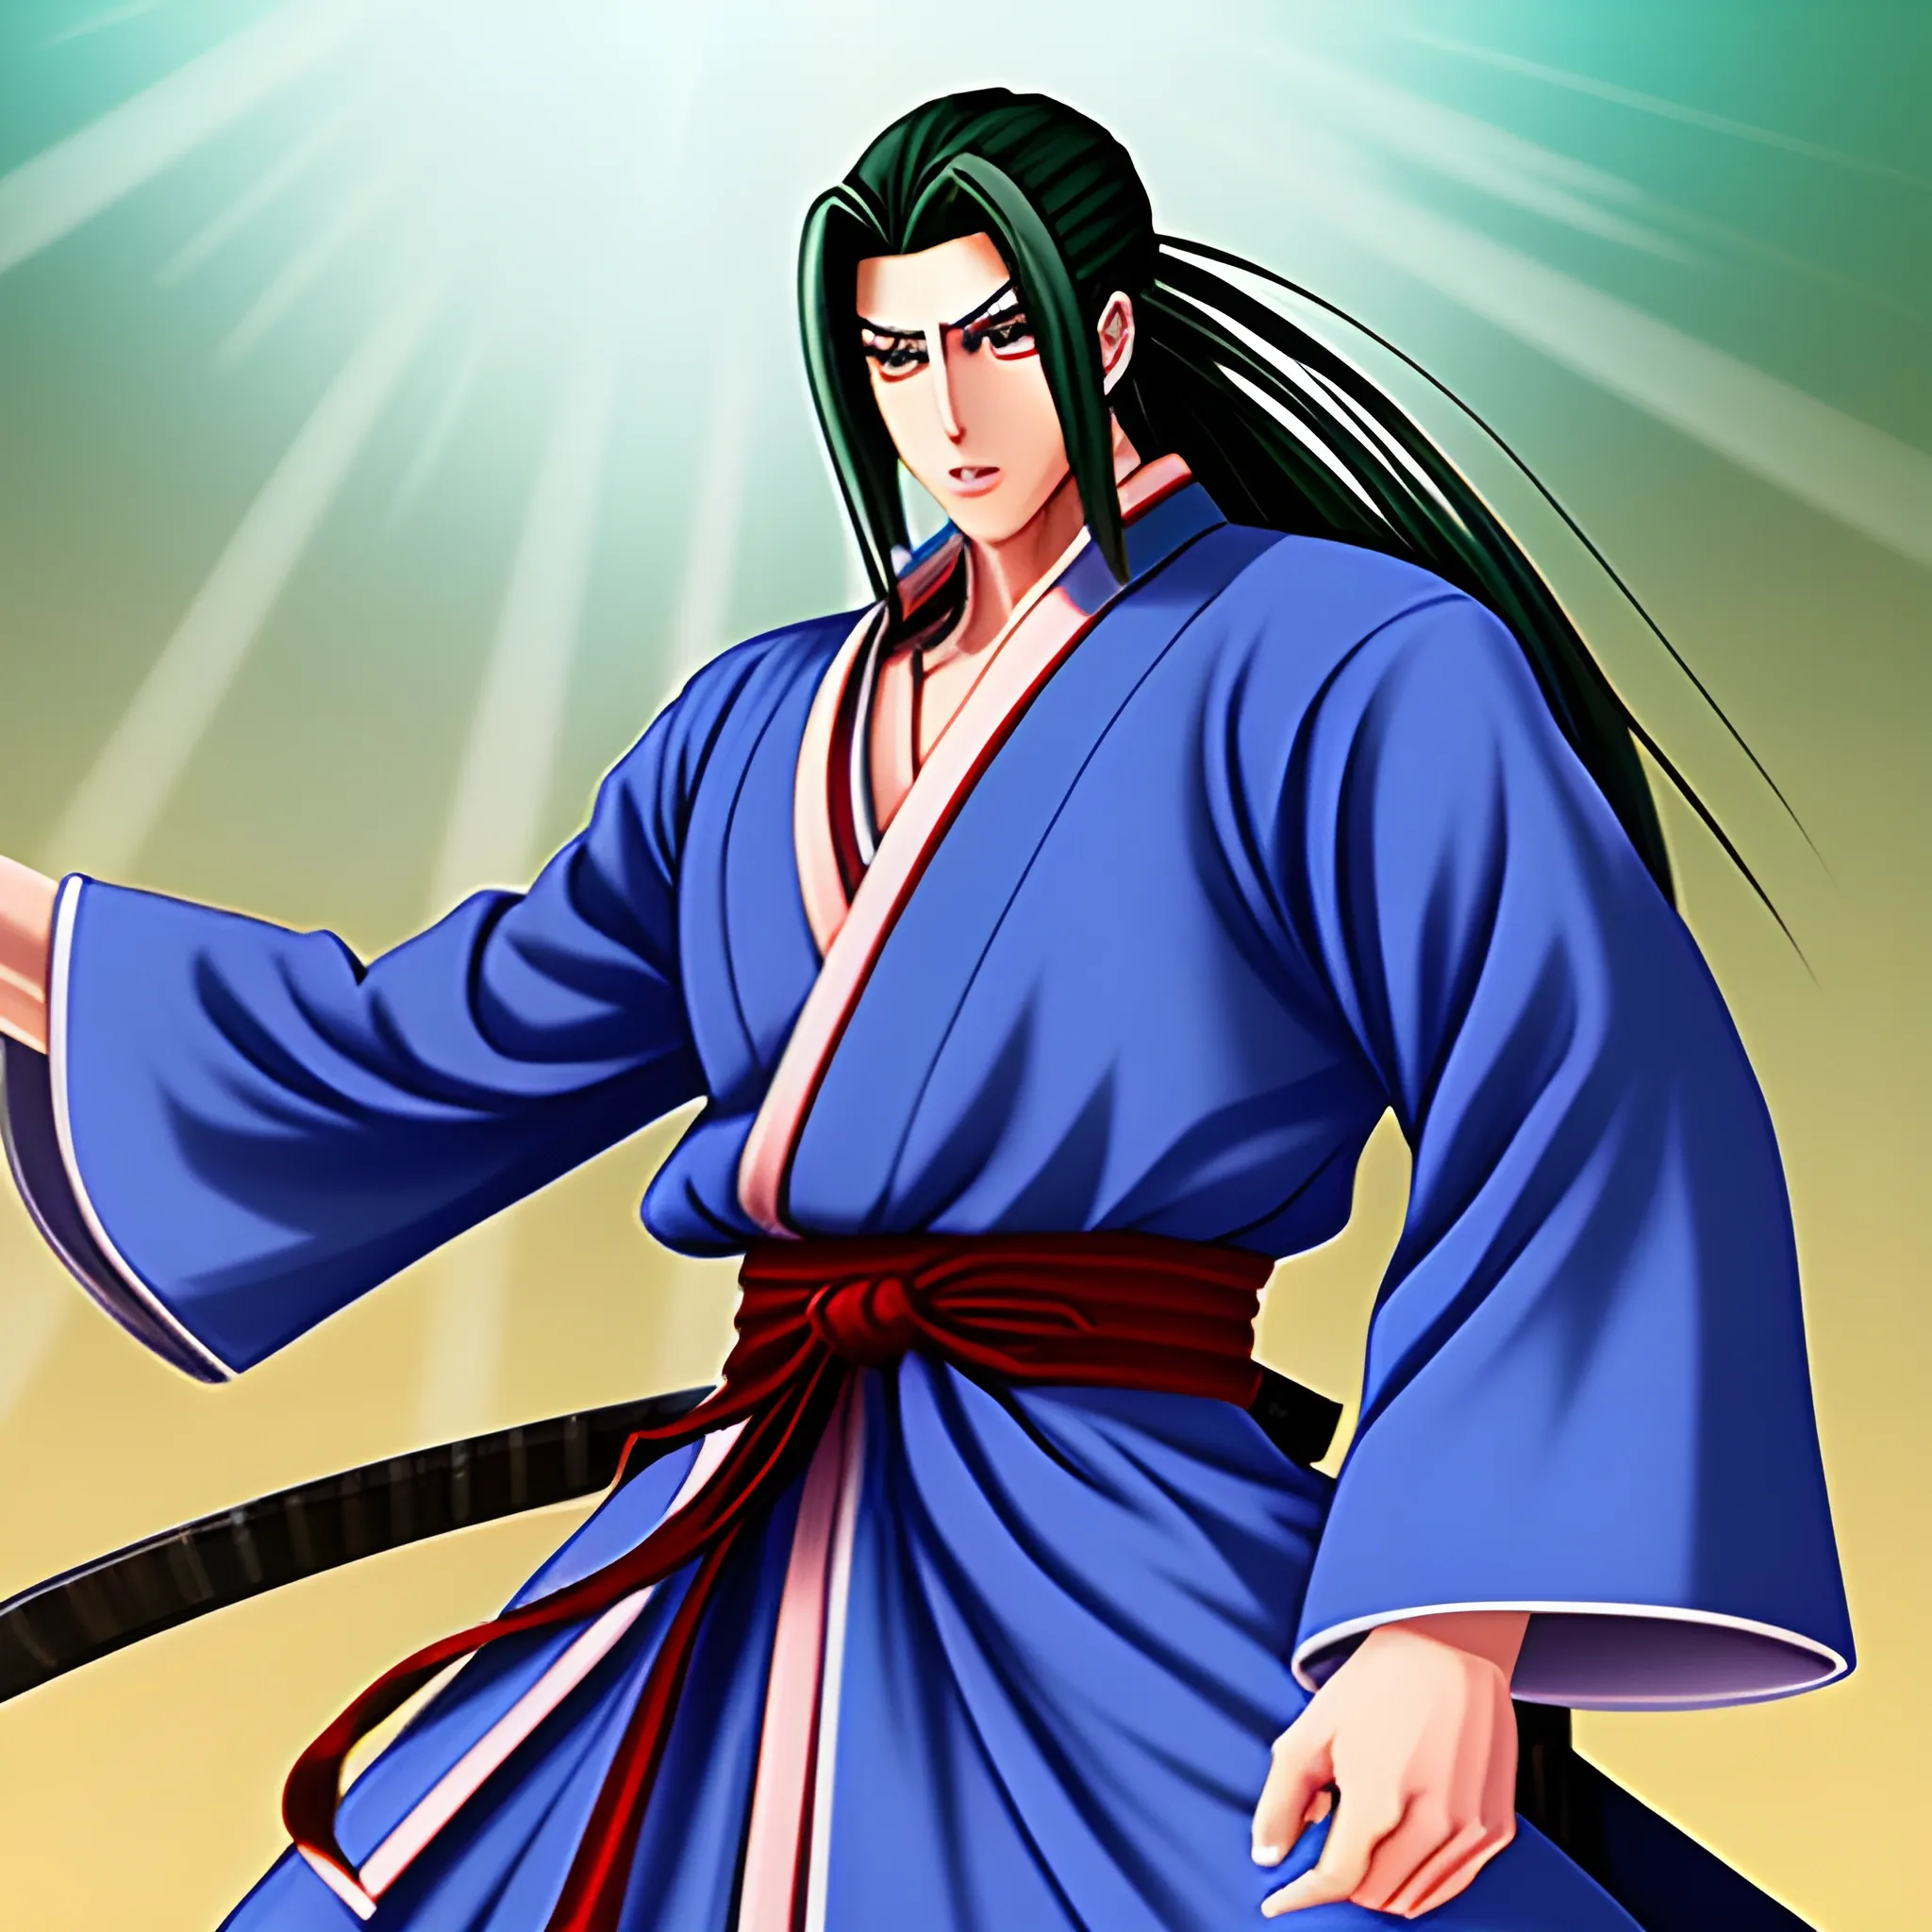 I would like a picture of Ukyo from the game Samurai Shodown, but if he was a human in a real movie
